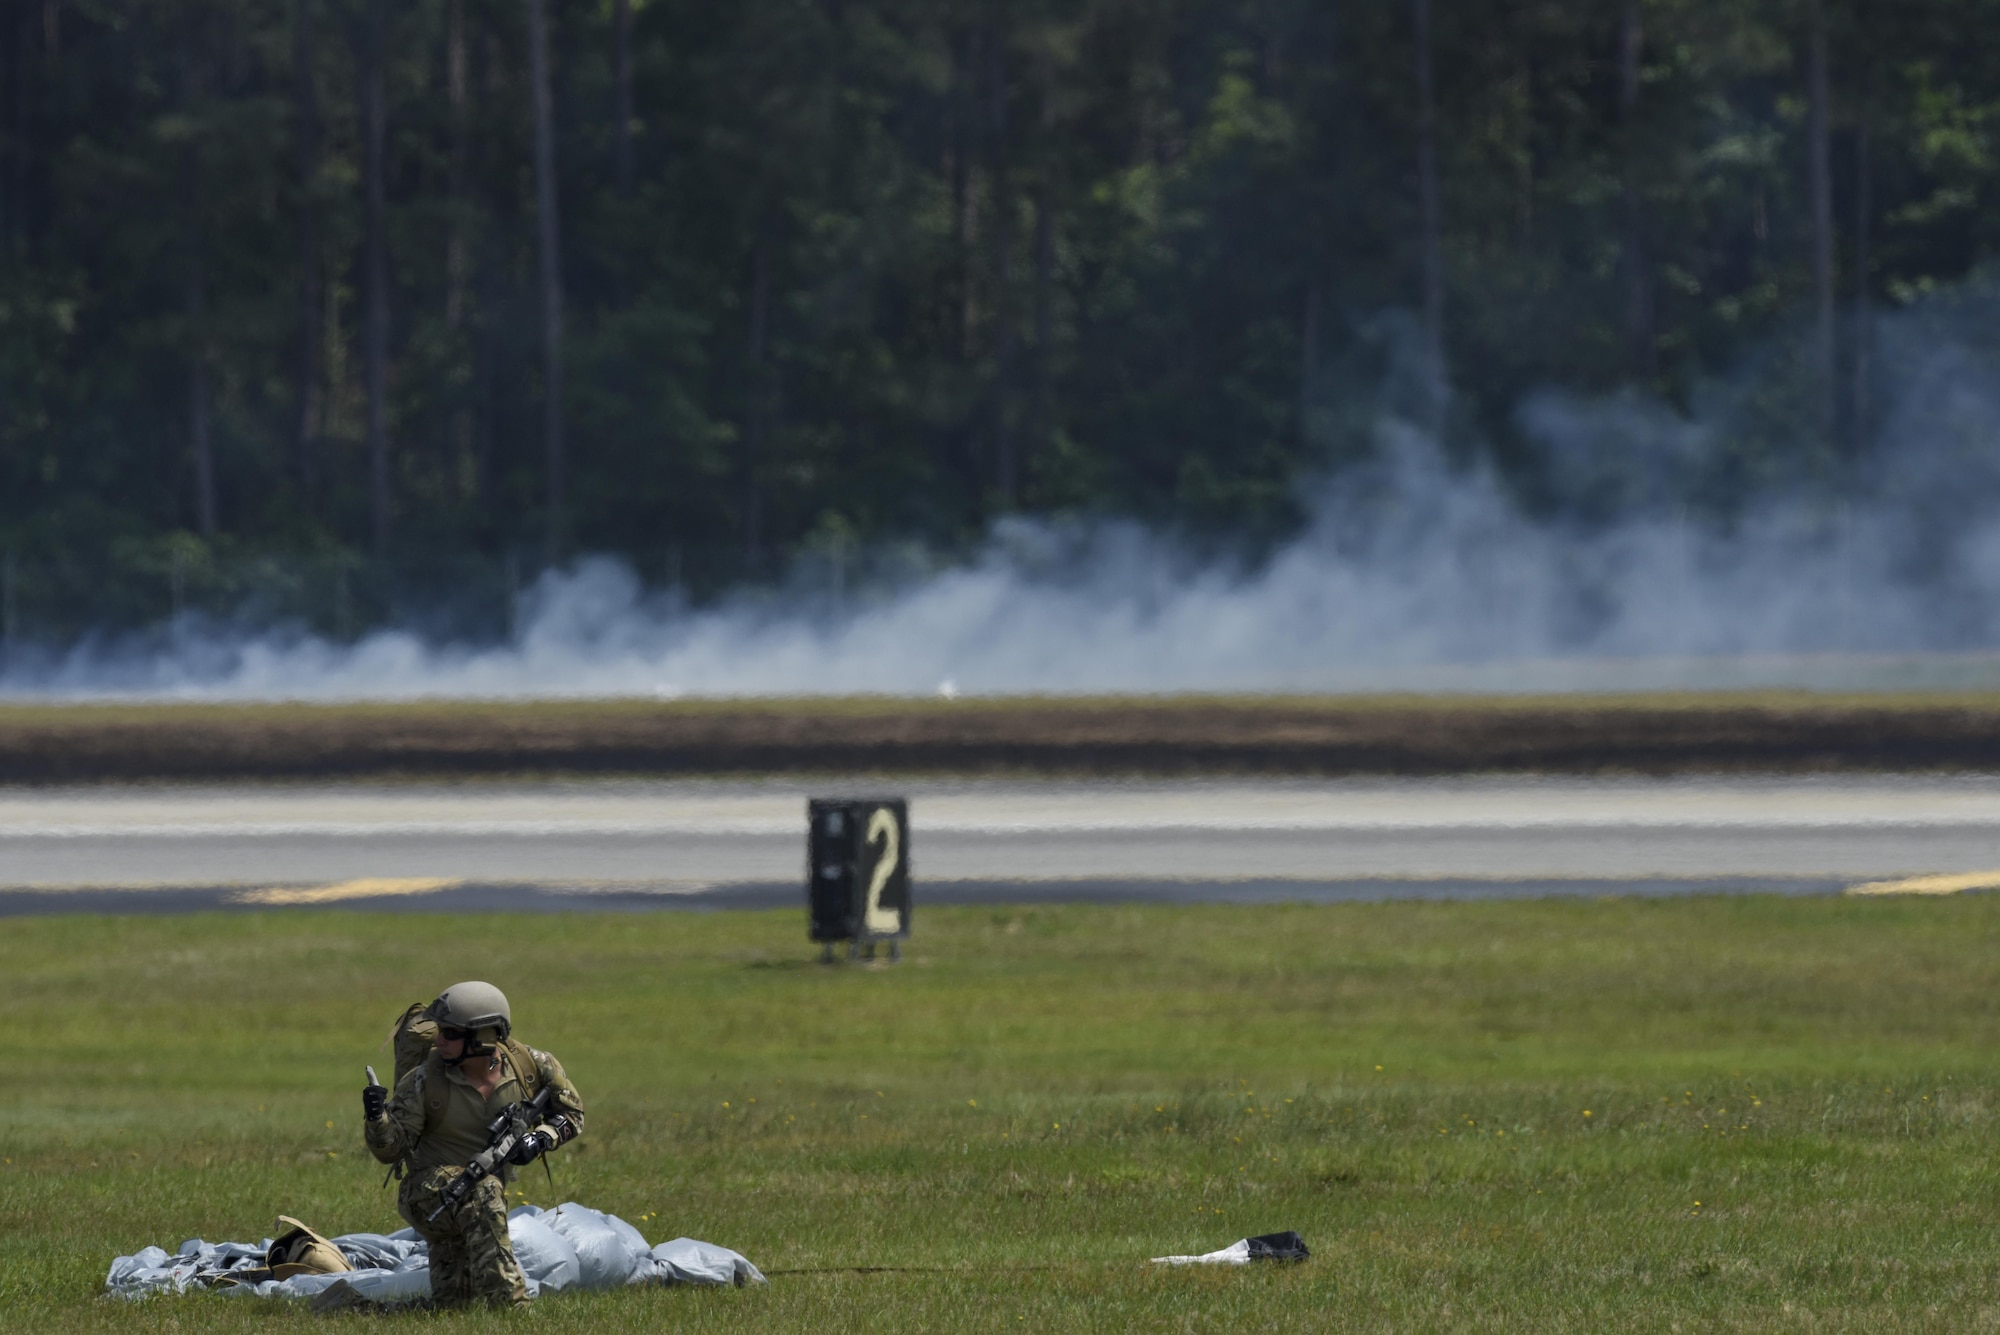 A joint terminal attack controller signals a teammate as part of a combined arms demonstration during the Wings Over Wayne Air Show, May 21, 2017, at Seymour Johnson Air Force Base, North Carolina. During the demonstration, the JTACs called in air support to alleviate a troops-in-contact situation. (U.S. Air Force photo by Staff Sgt. Brittain Crolley)